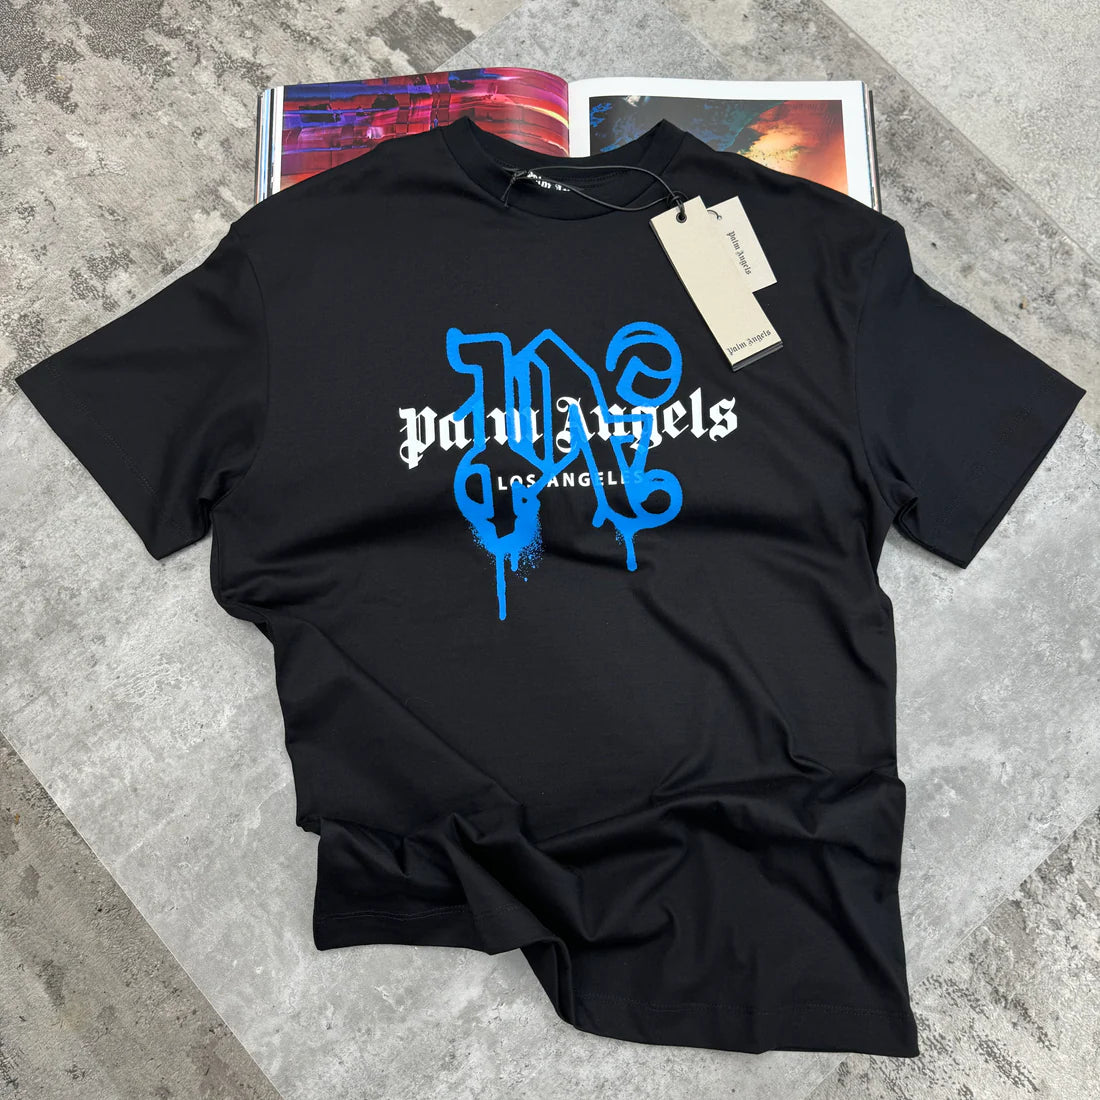 Palm angels Tshirts (click for latest available Tshirts)